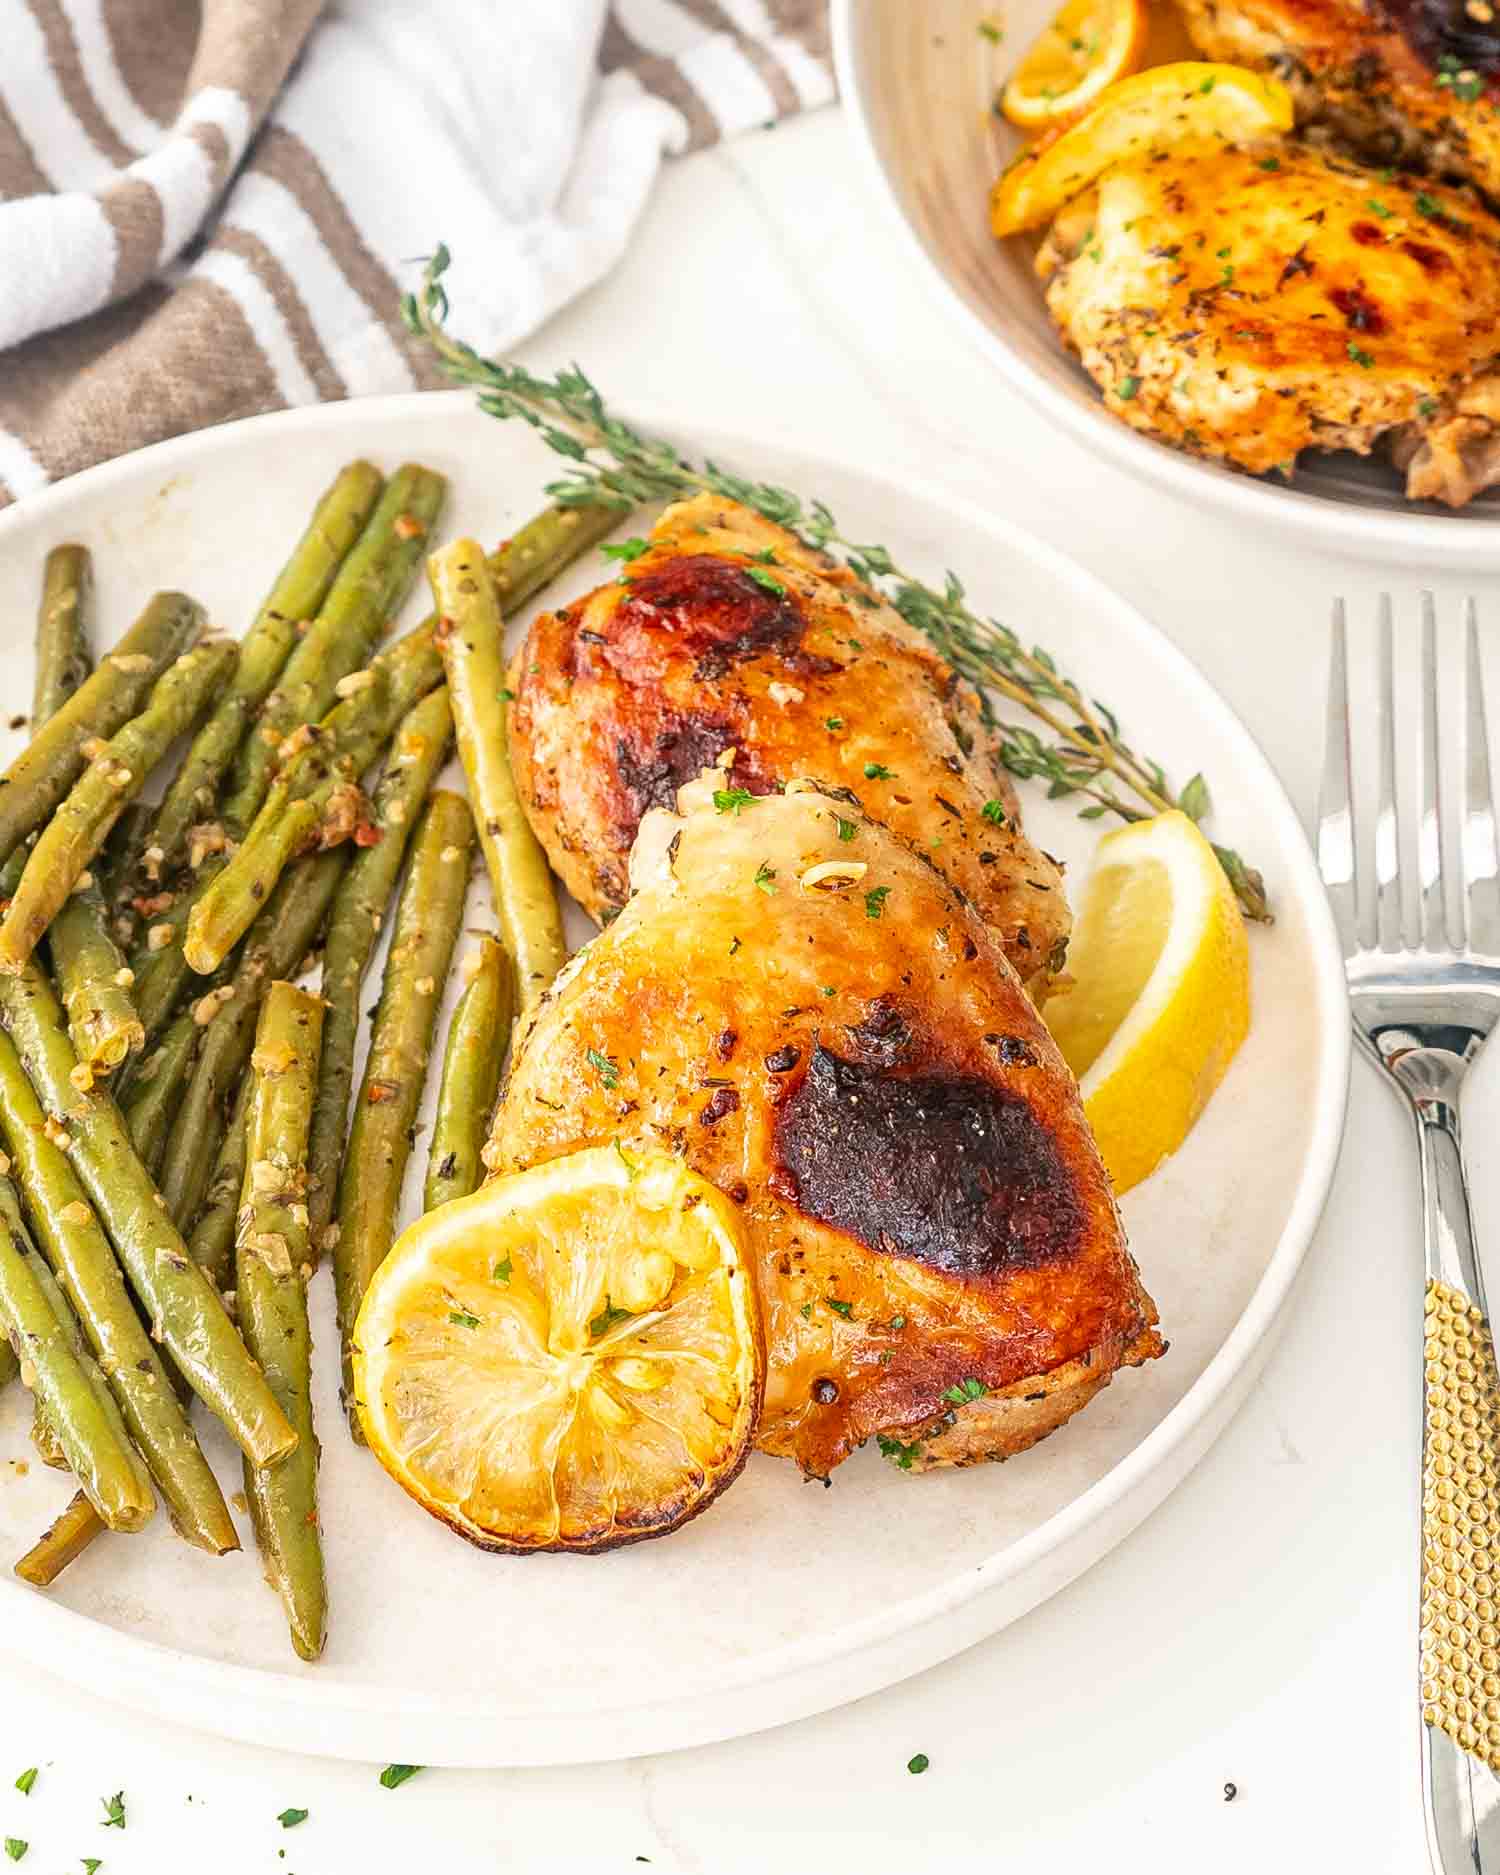 two baked lemon chicken thighs on a white plate along a side of green beans.